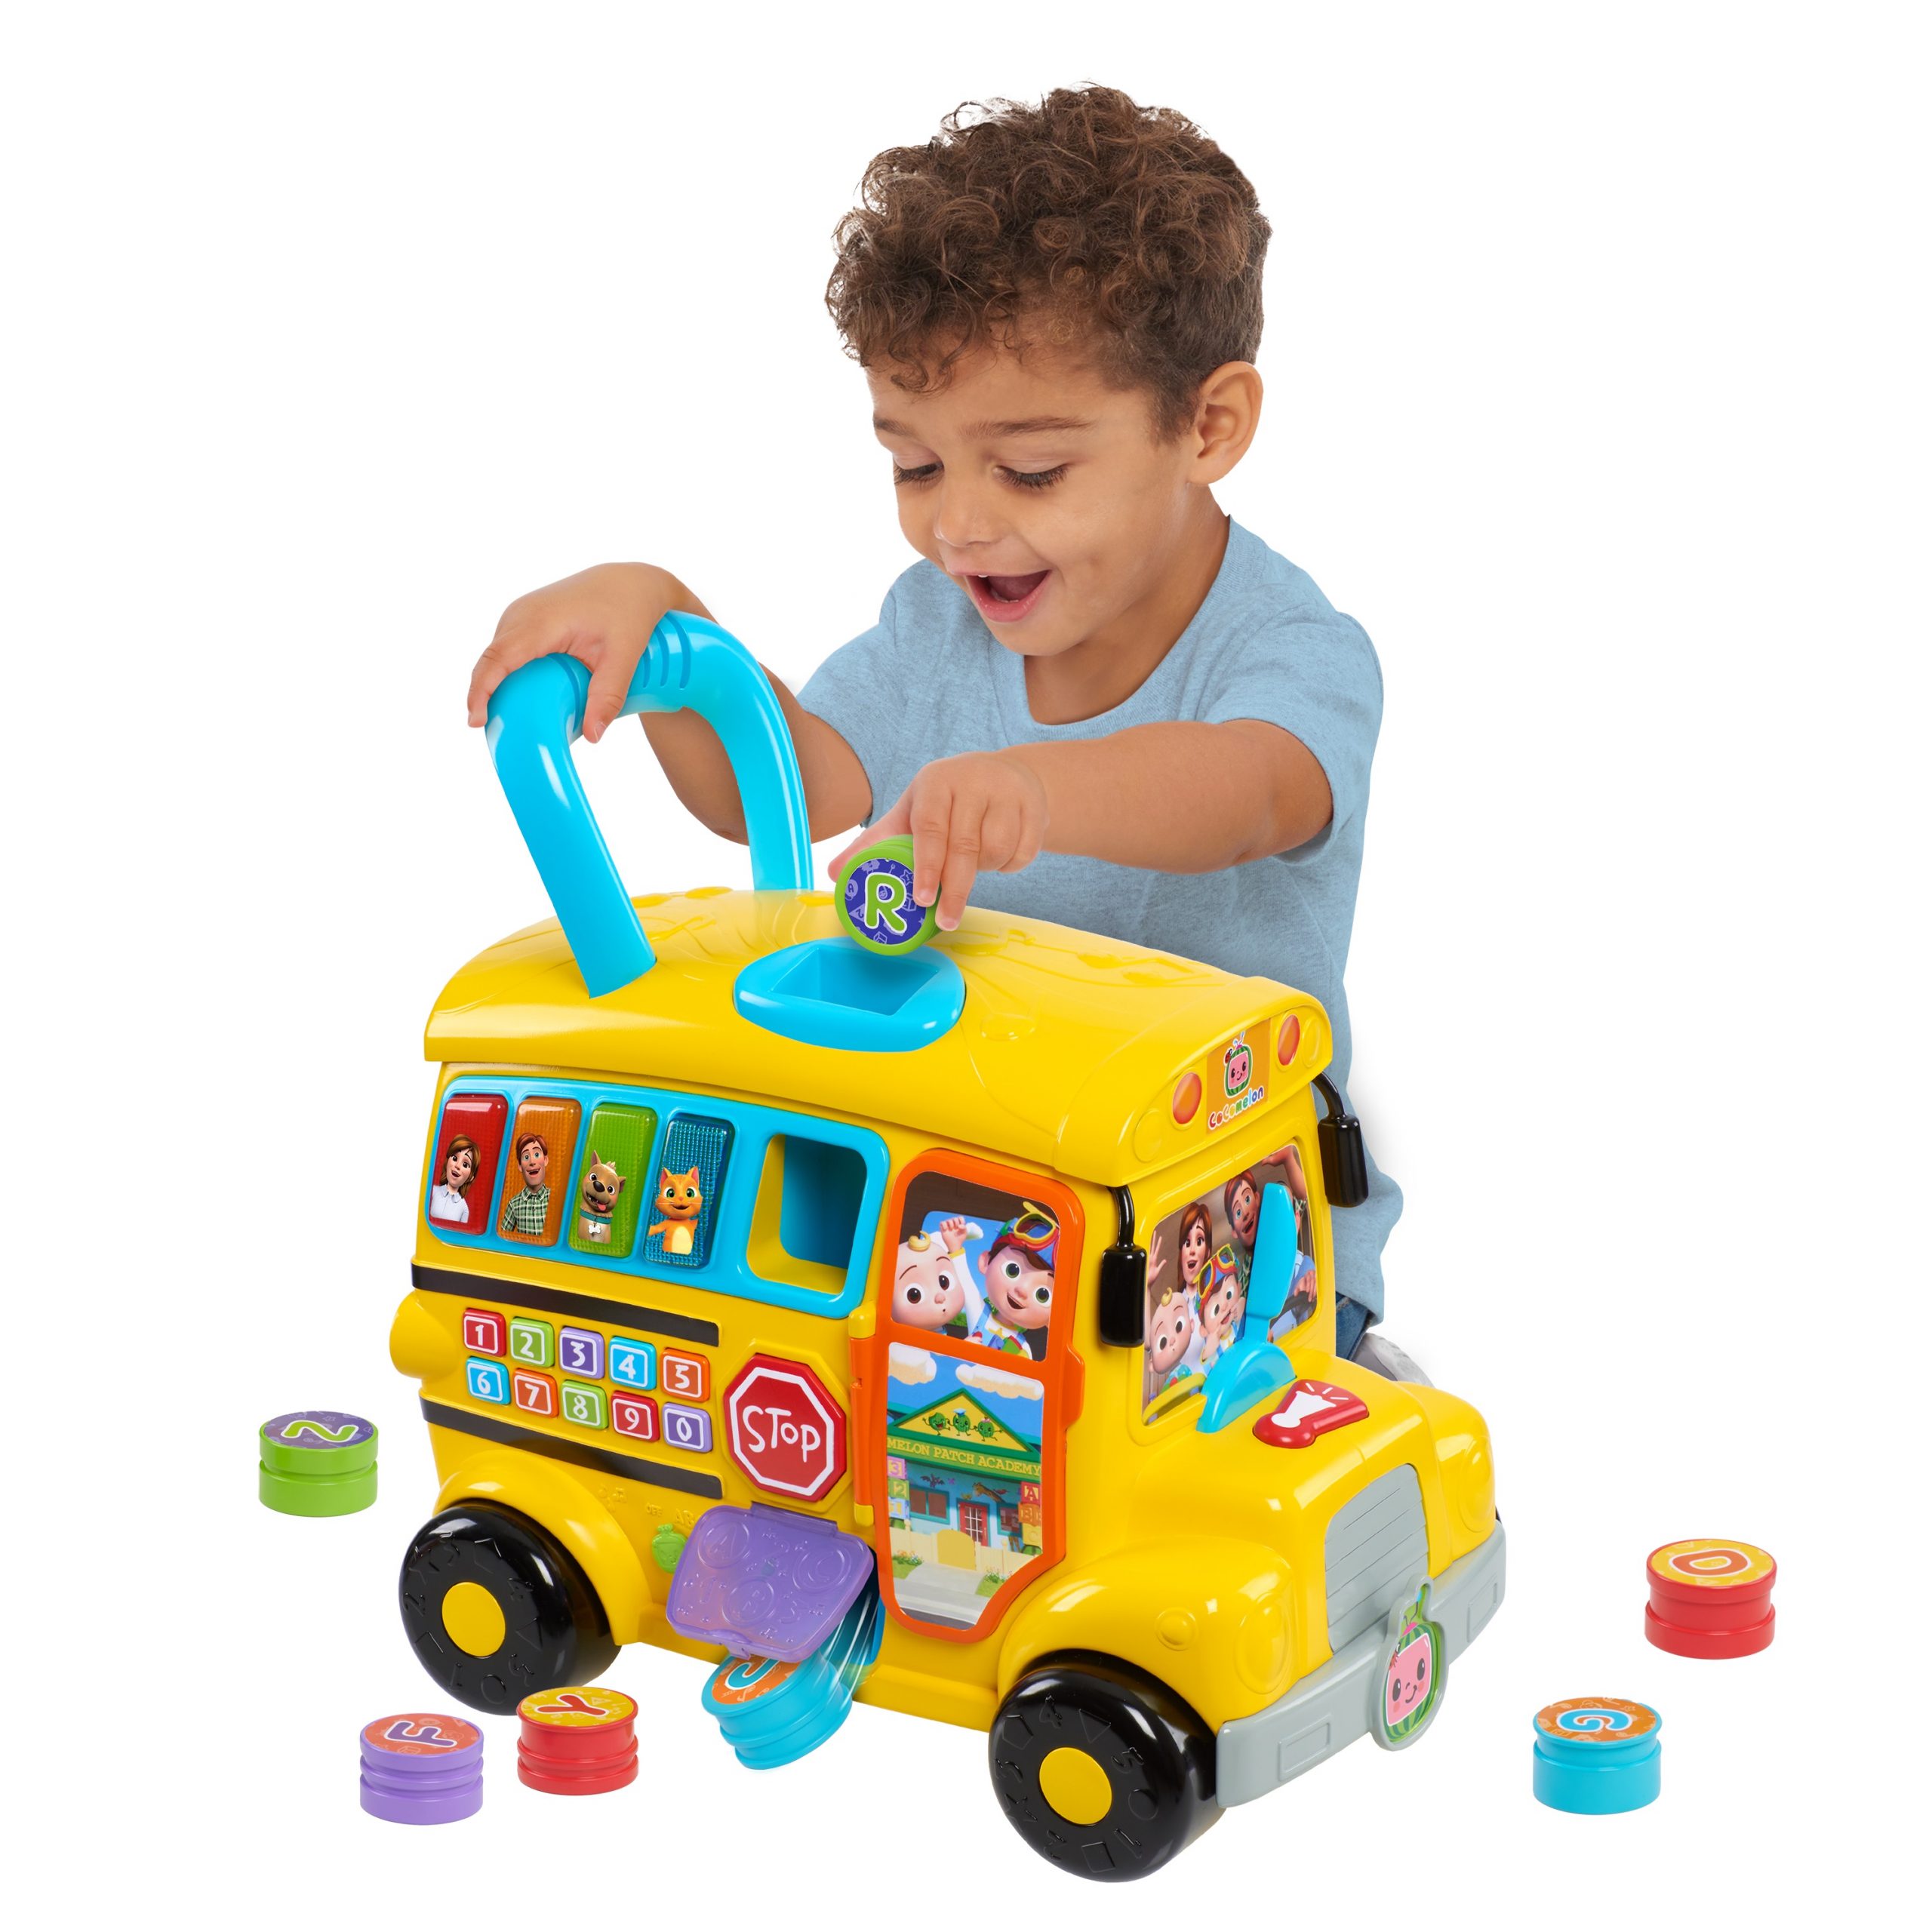 CoComelon Ultimate Learning Adventure Bus